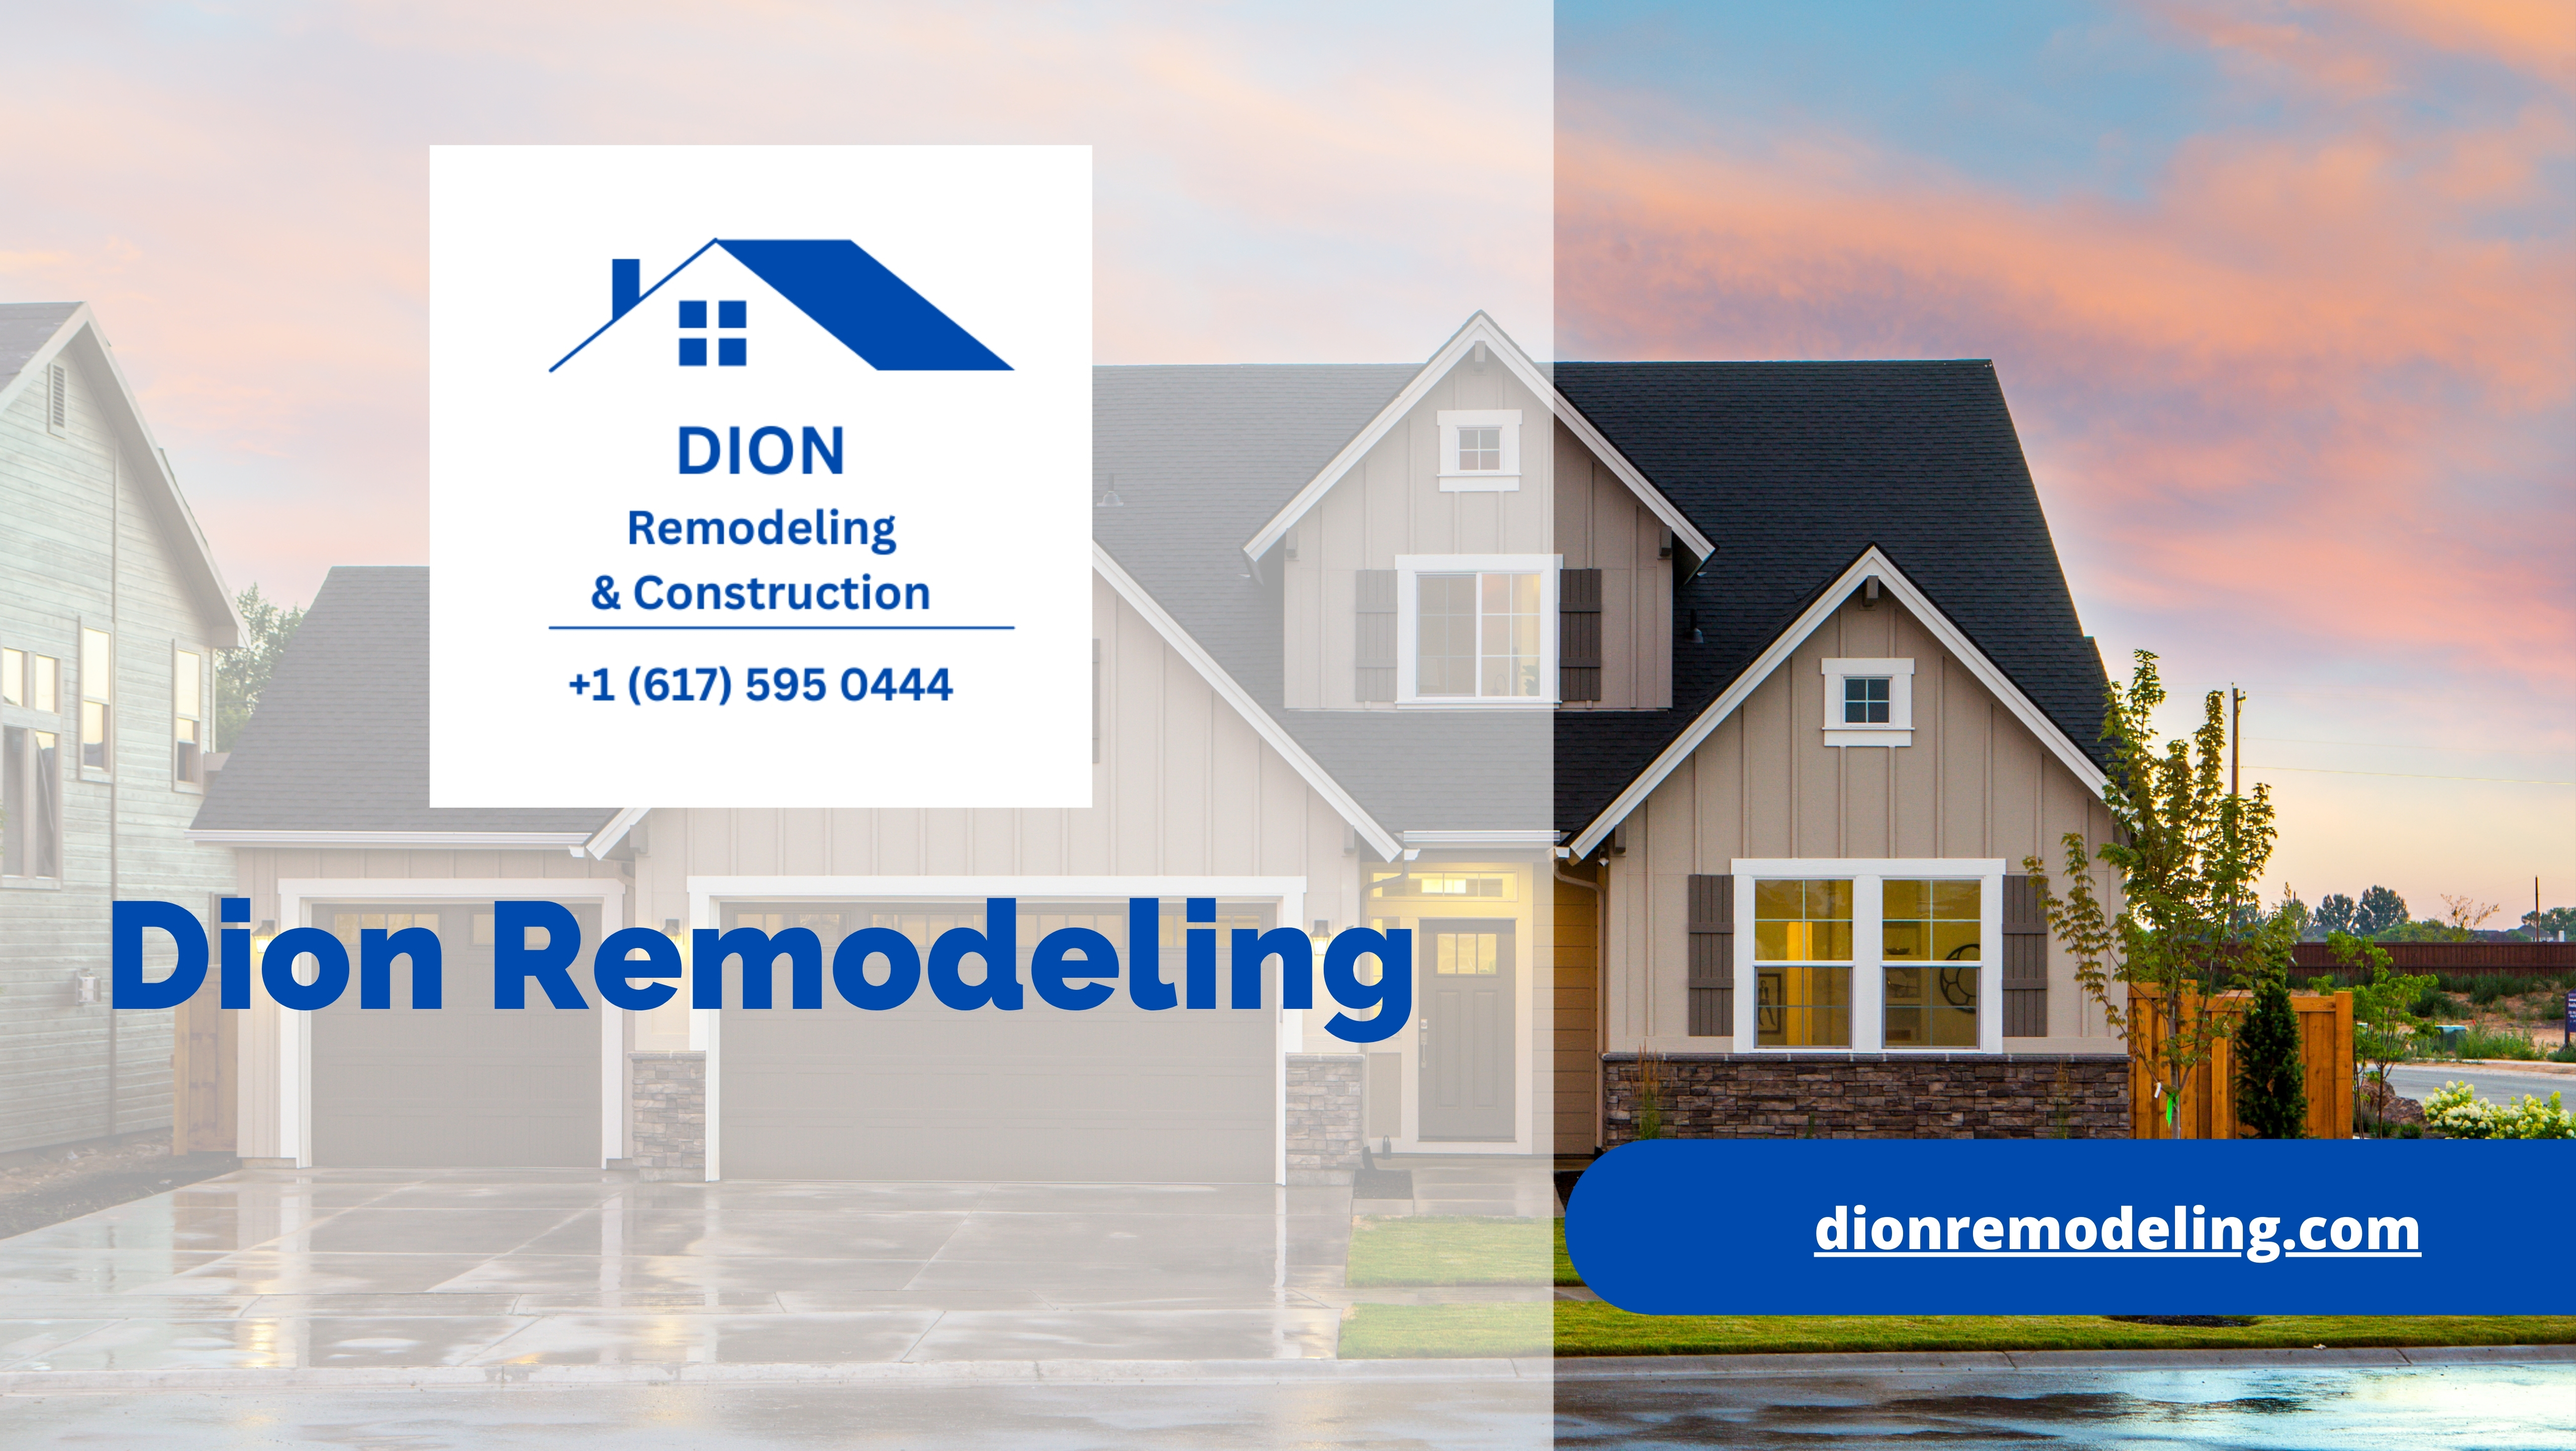 Dion Remodeling Cover Image